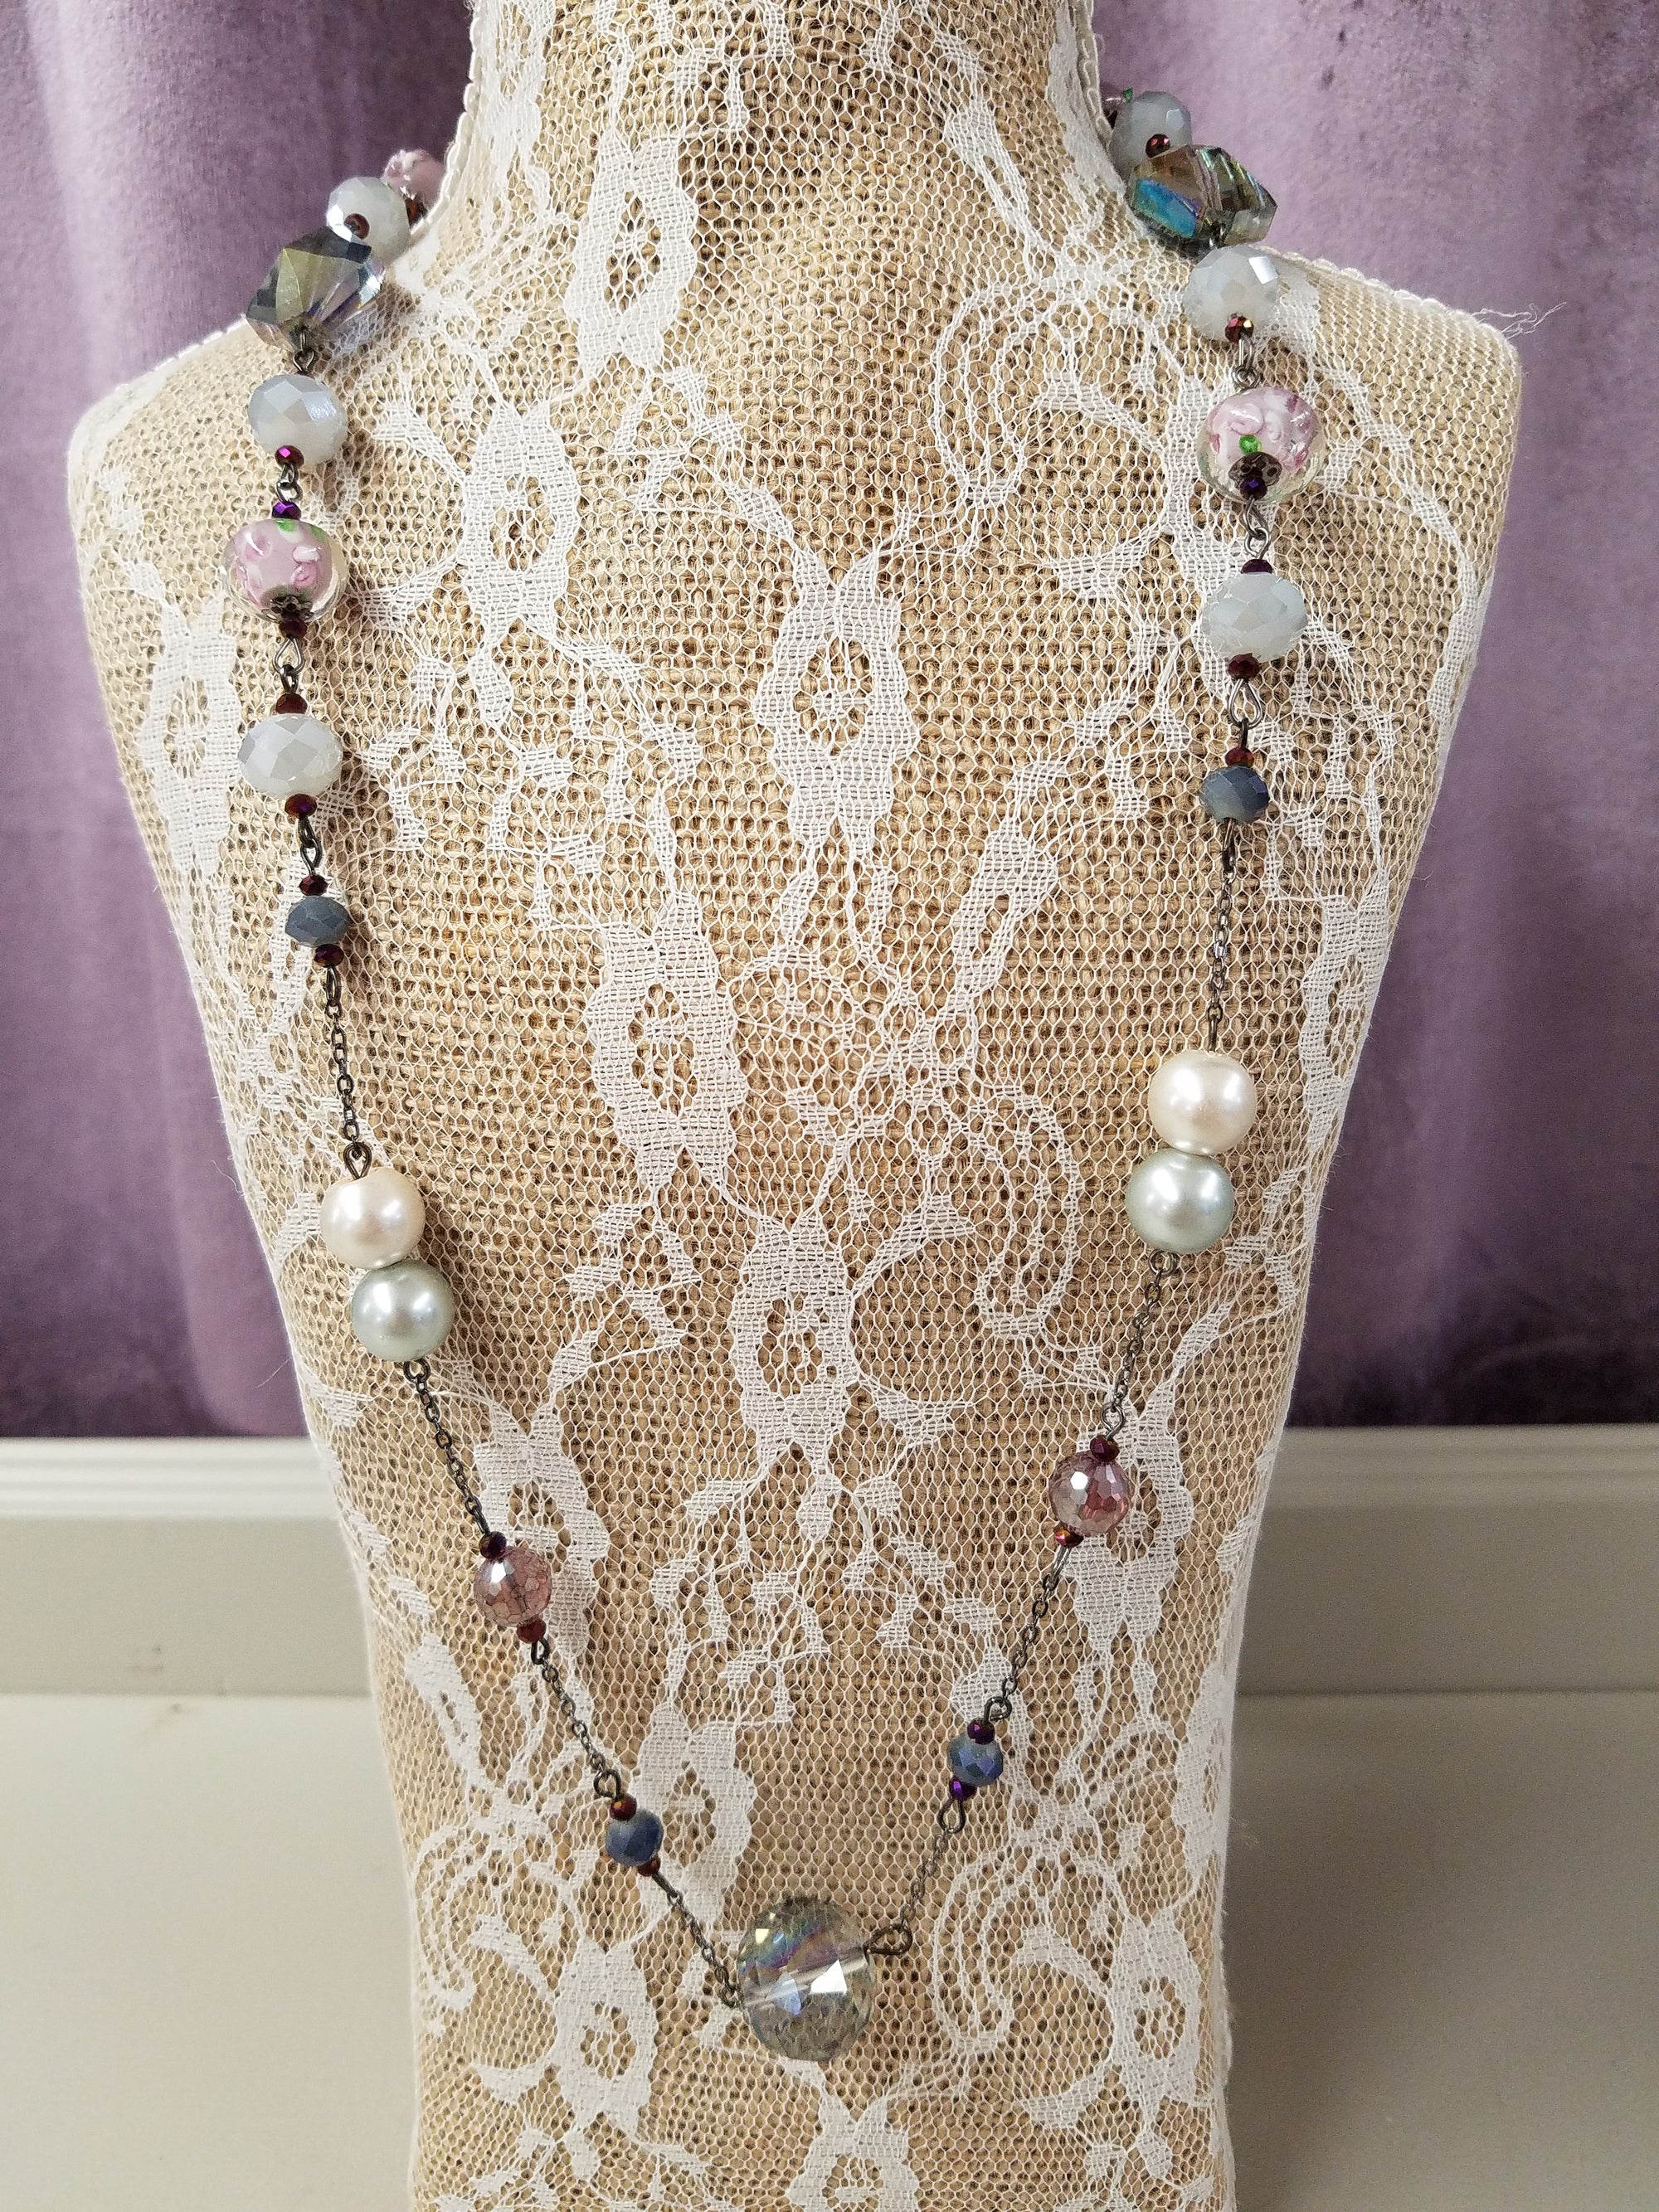 Stunning Long Necklace with Lampwork Beads - You-nique Bou-tique